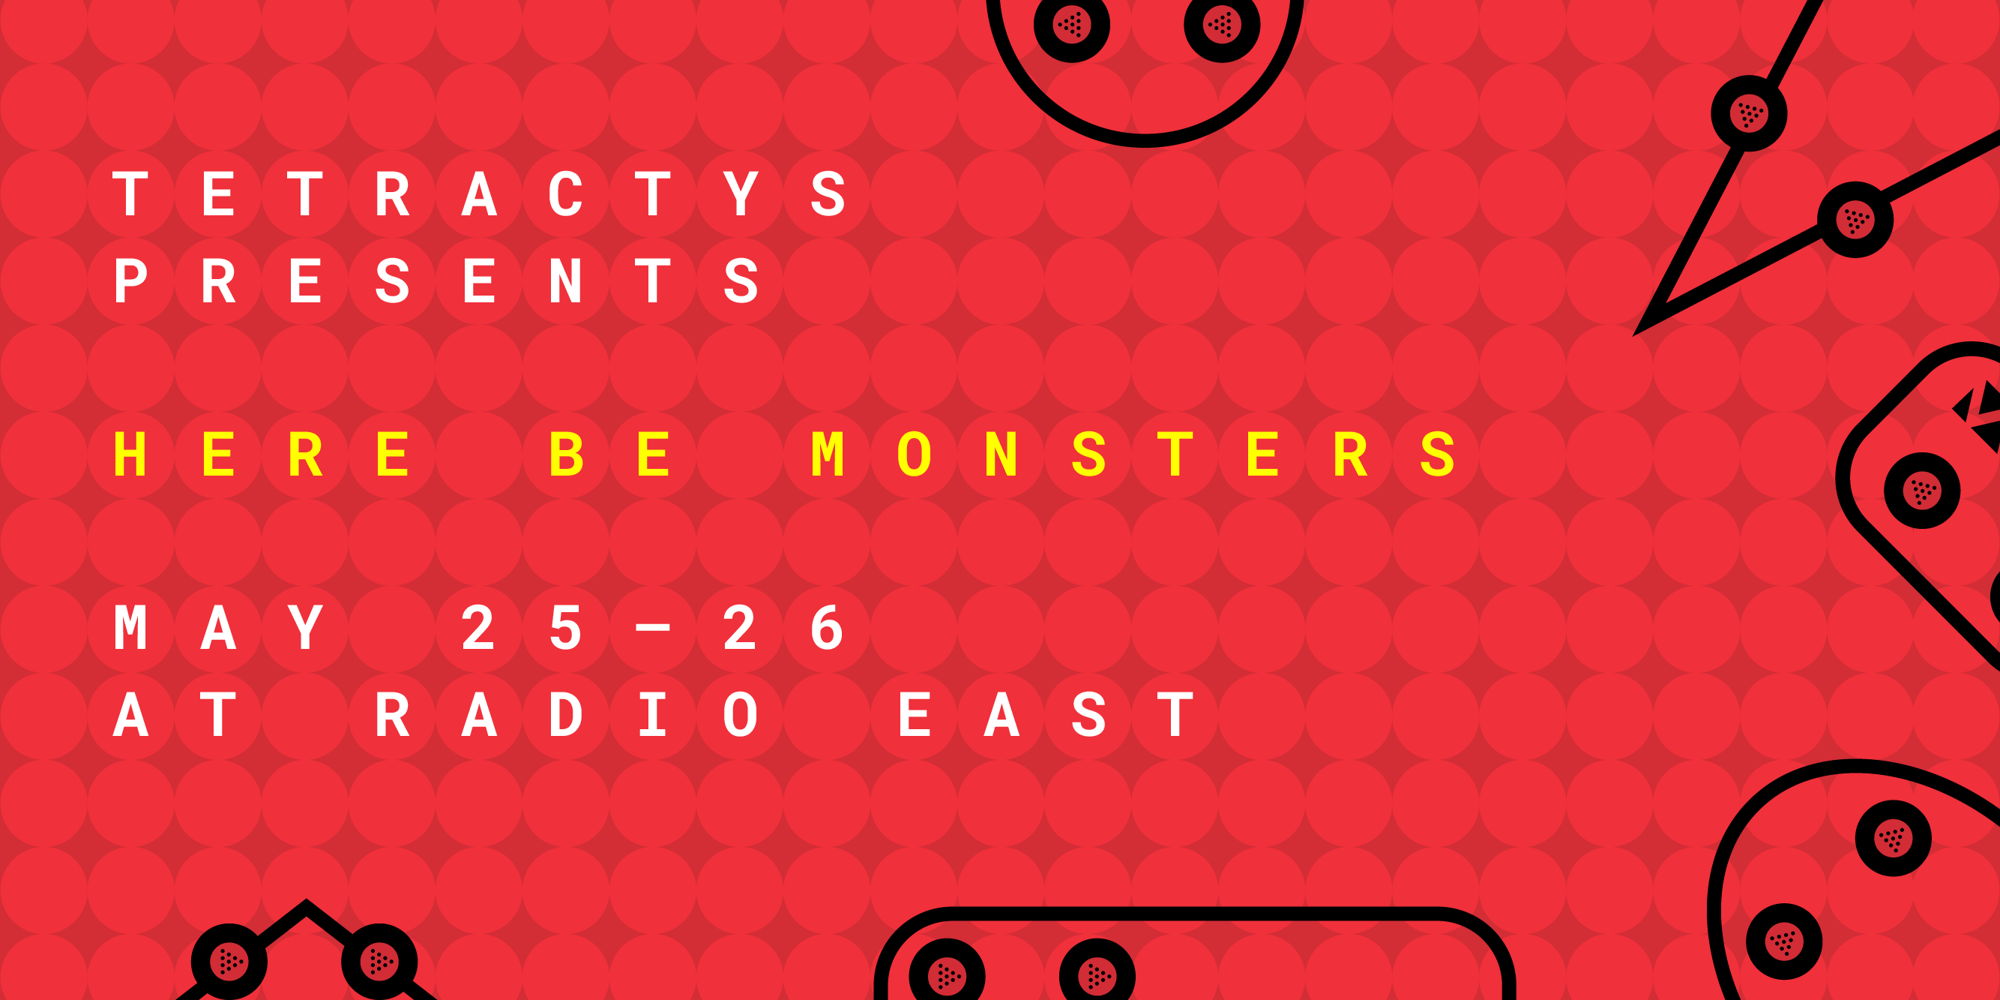 Here Be Monsters New Music Festival promotional image